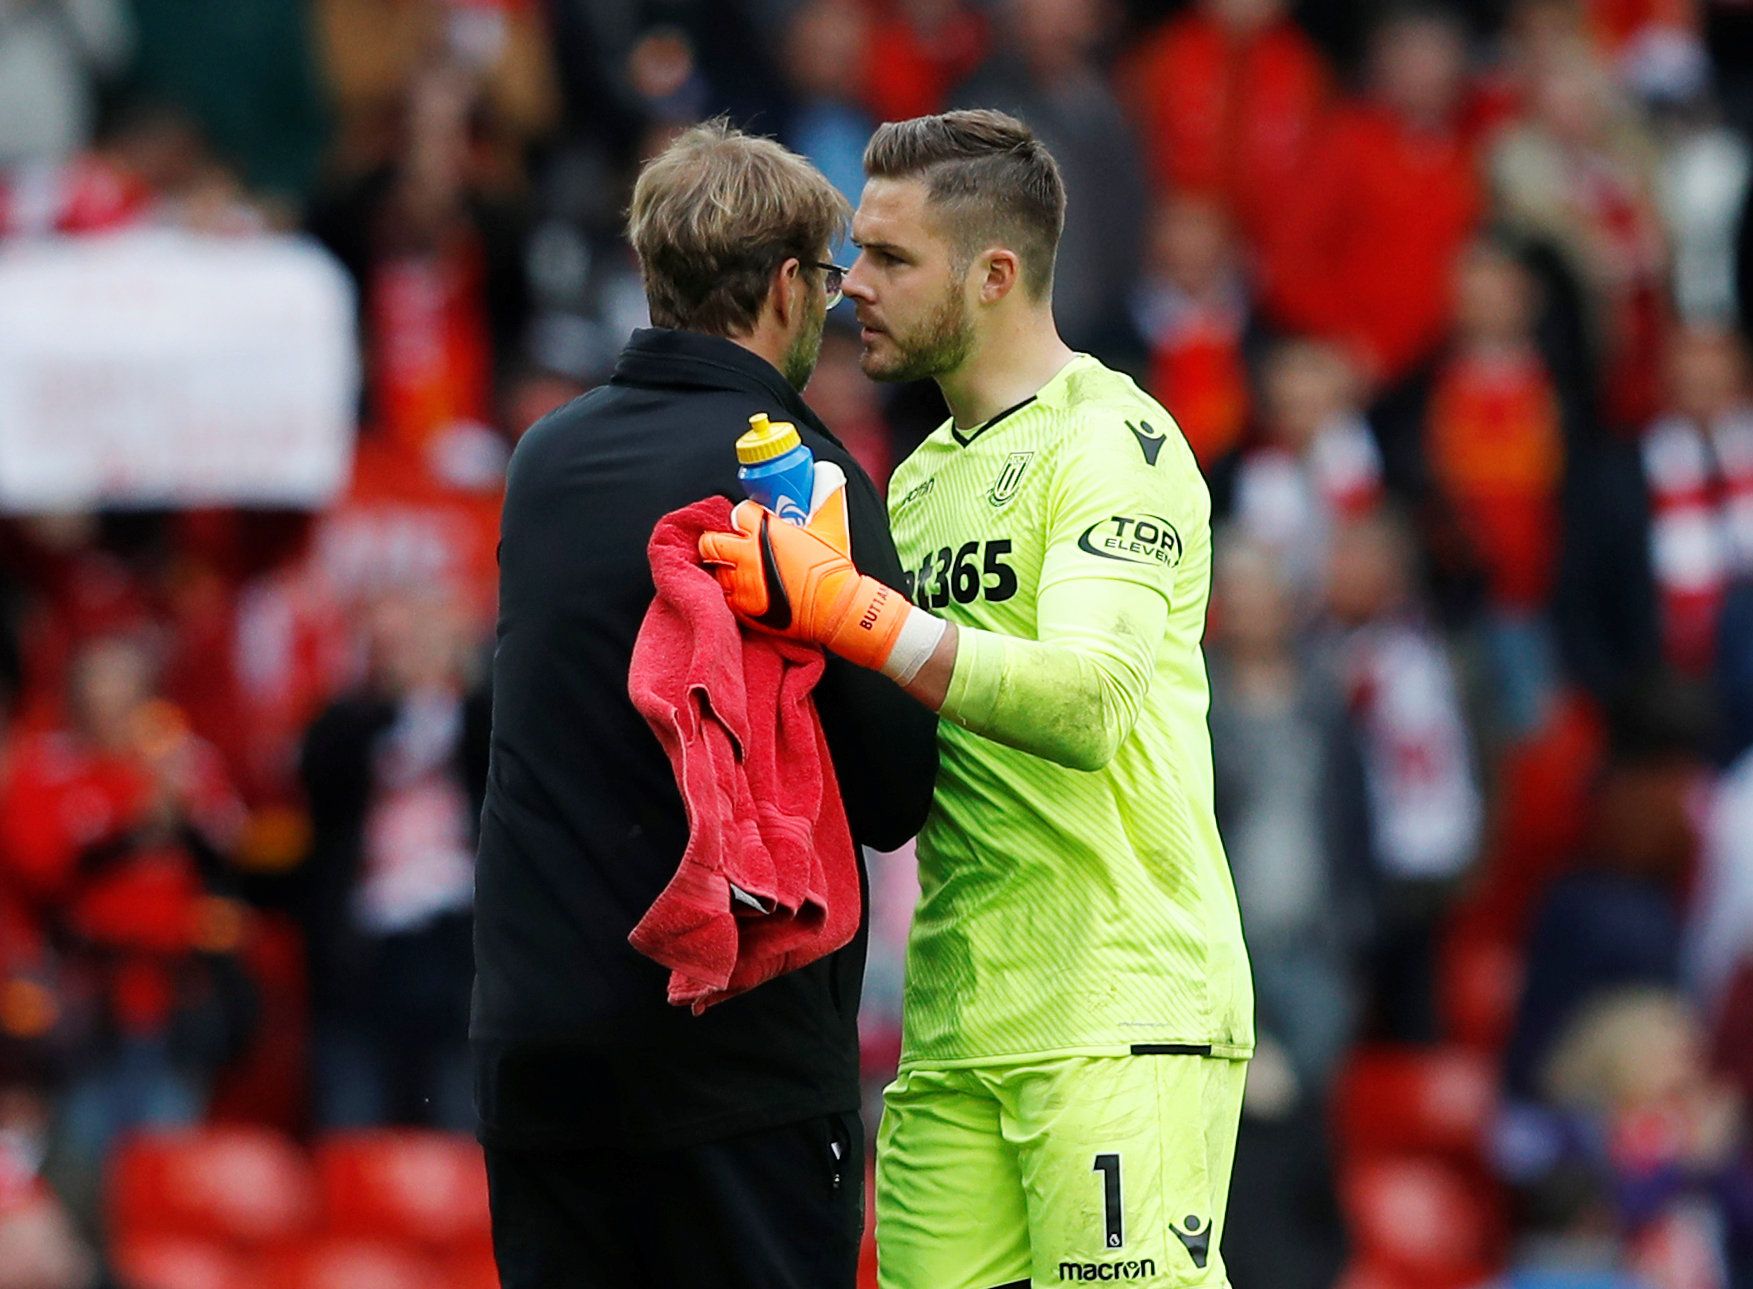 Soccer Football - Premier League - Liverpool v Stoke City - Anfield, Liverpool, Britain - April 28, 2018   Liverpool manager Juergen Klopp speaks with Stoke City's Jack Butland after the match   REUTERS/Phil Noble    EDITORIAL USE ONLY. No use with unauthorized audio, video, data, fixture lists, club/league logos or 